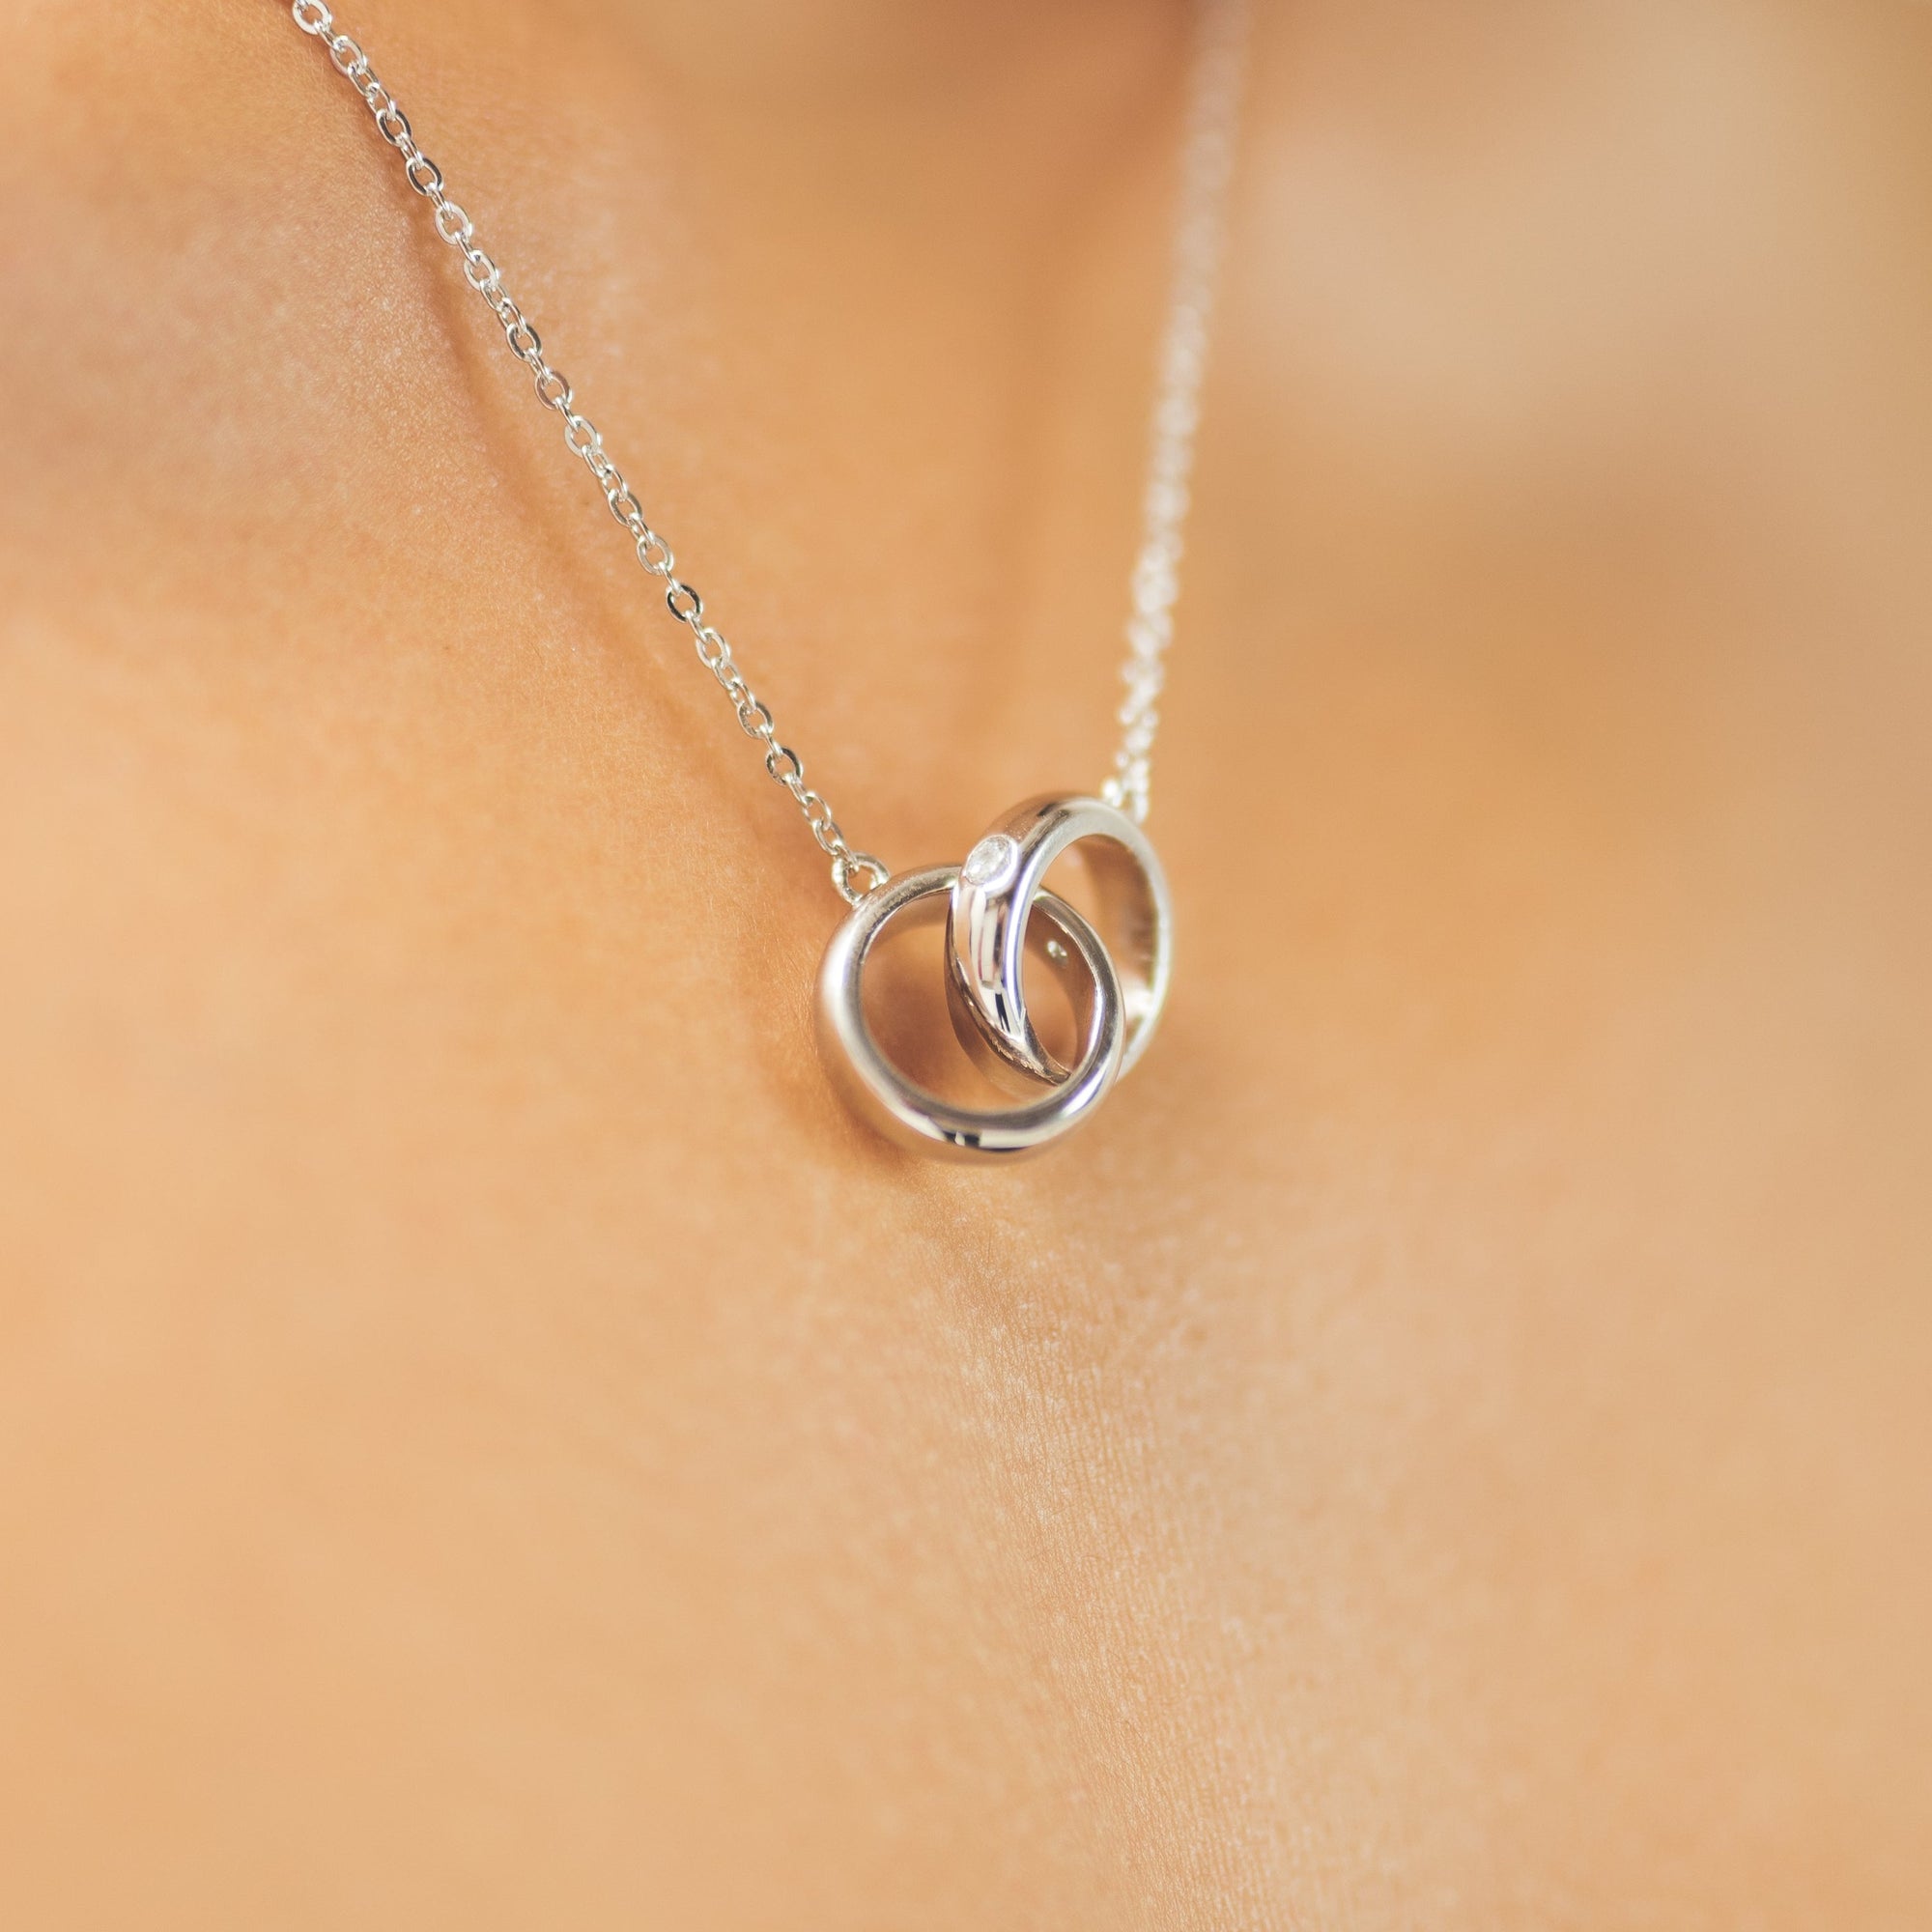 Love Ring Necklace